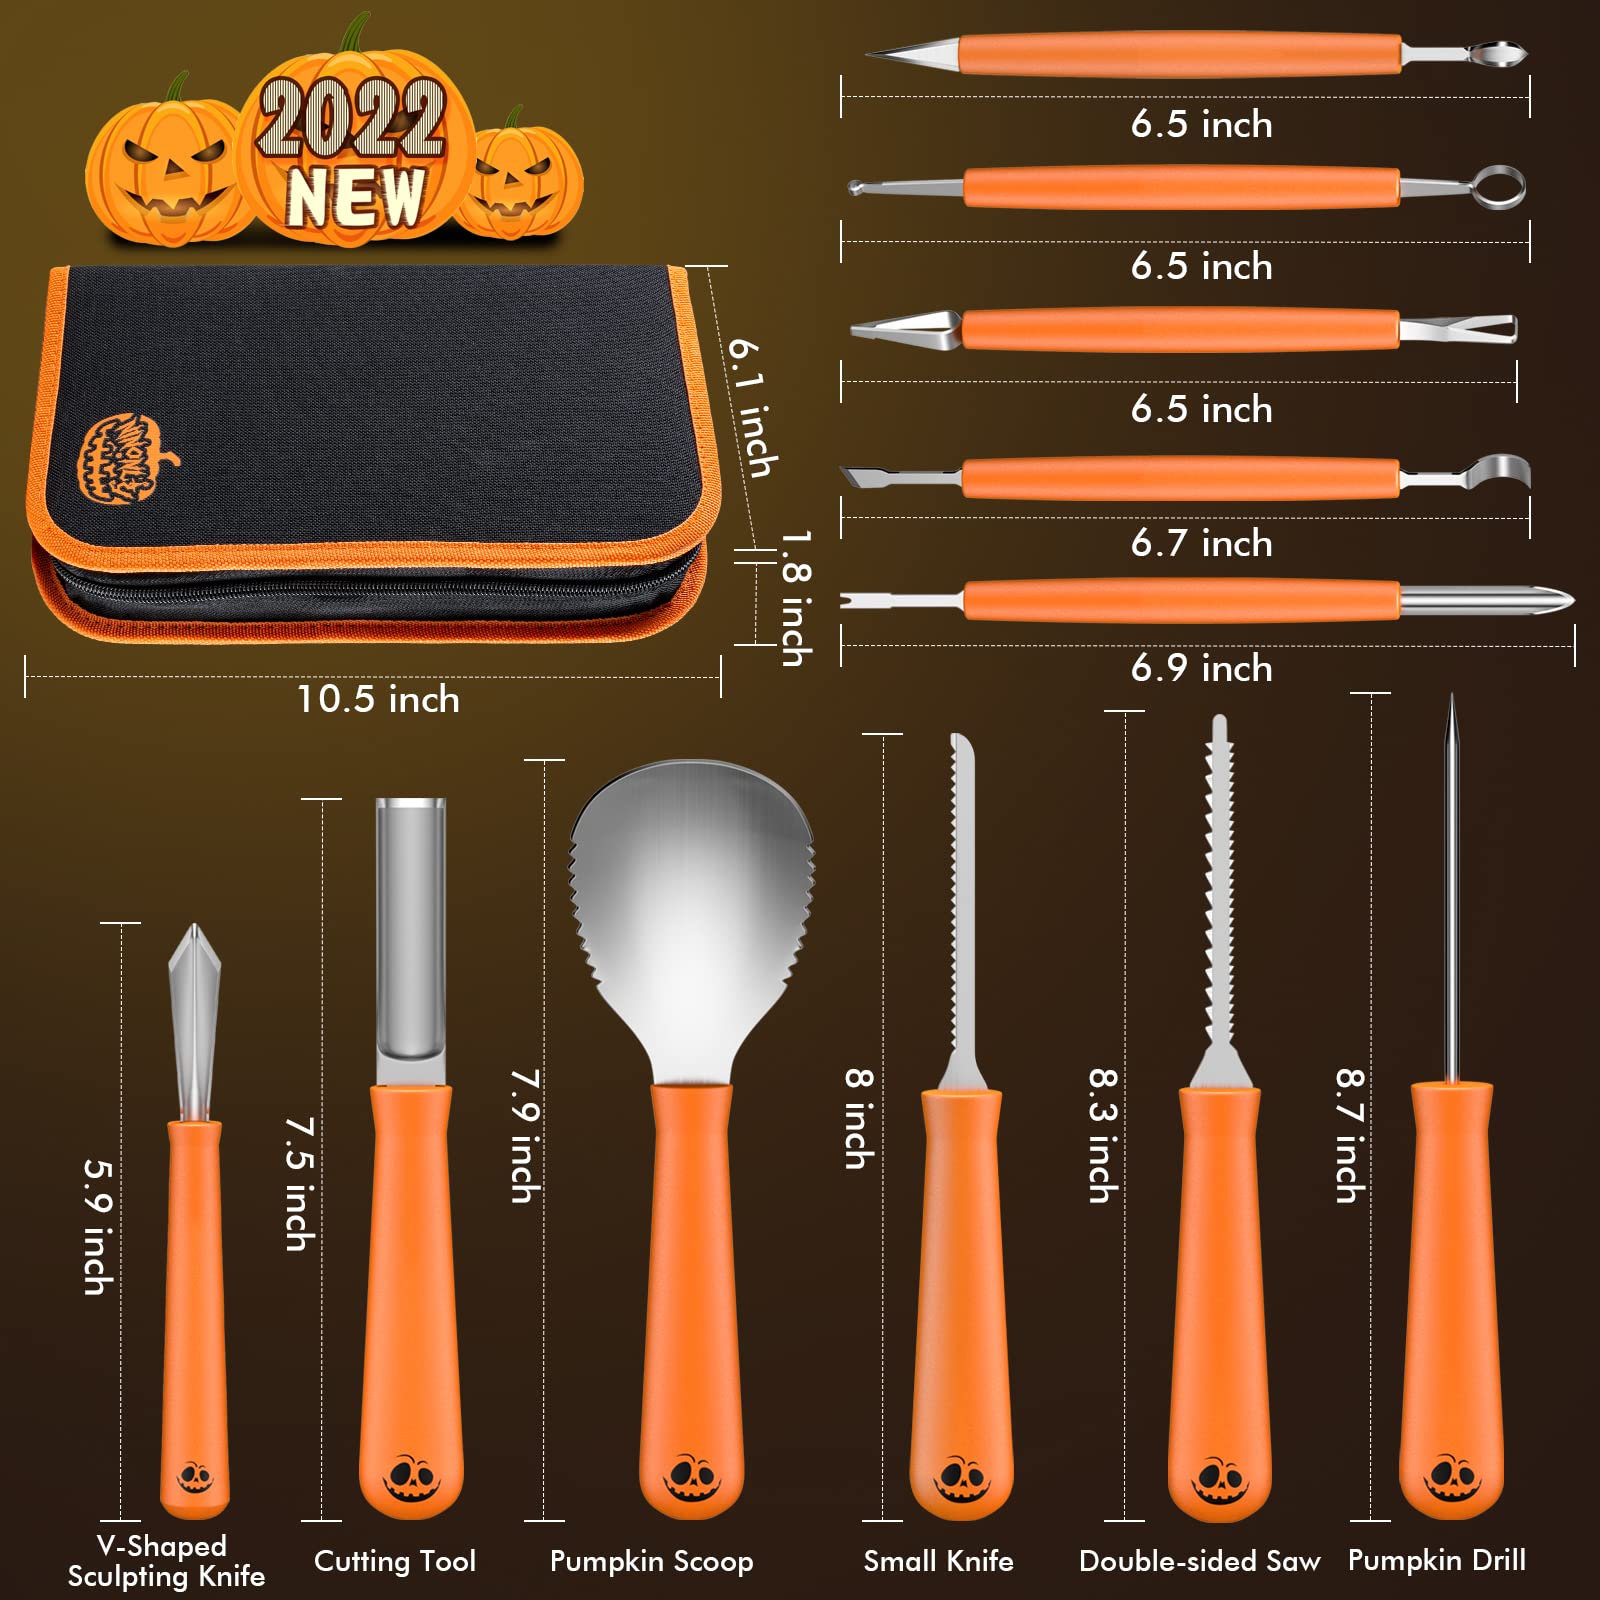 Ninonly Pumpkin Carving Kit, Professional 17Pcs Stainless Steel Pumpkin Knives Tools with Carrying Bag Pumpkin Carver Pumpkin Sculpting Set for Adults Kids Halloween Party Decorating Jack-O-Lanterns